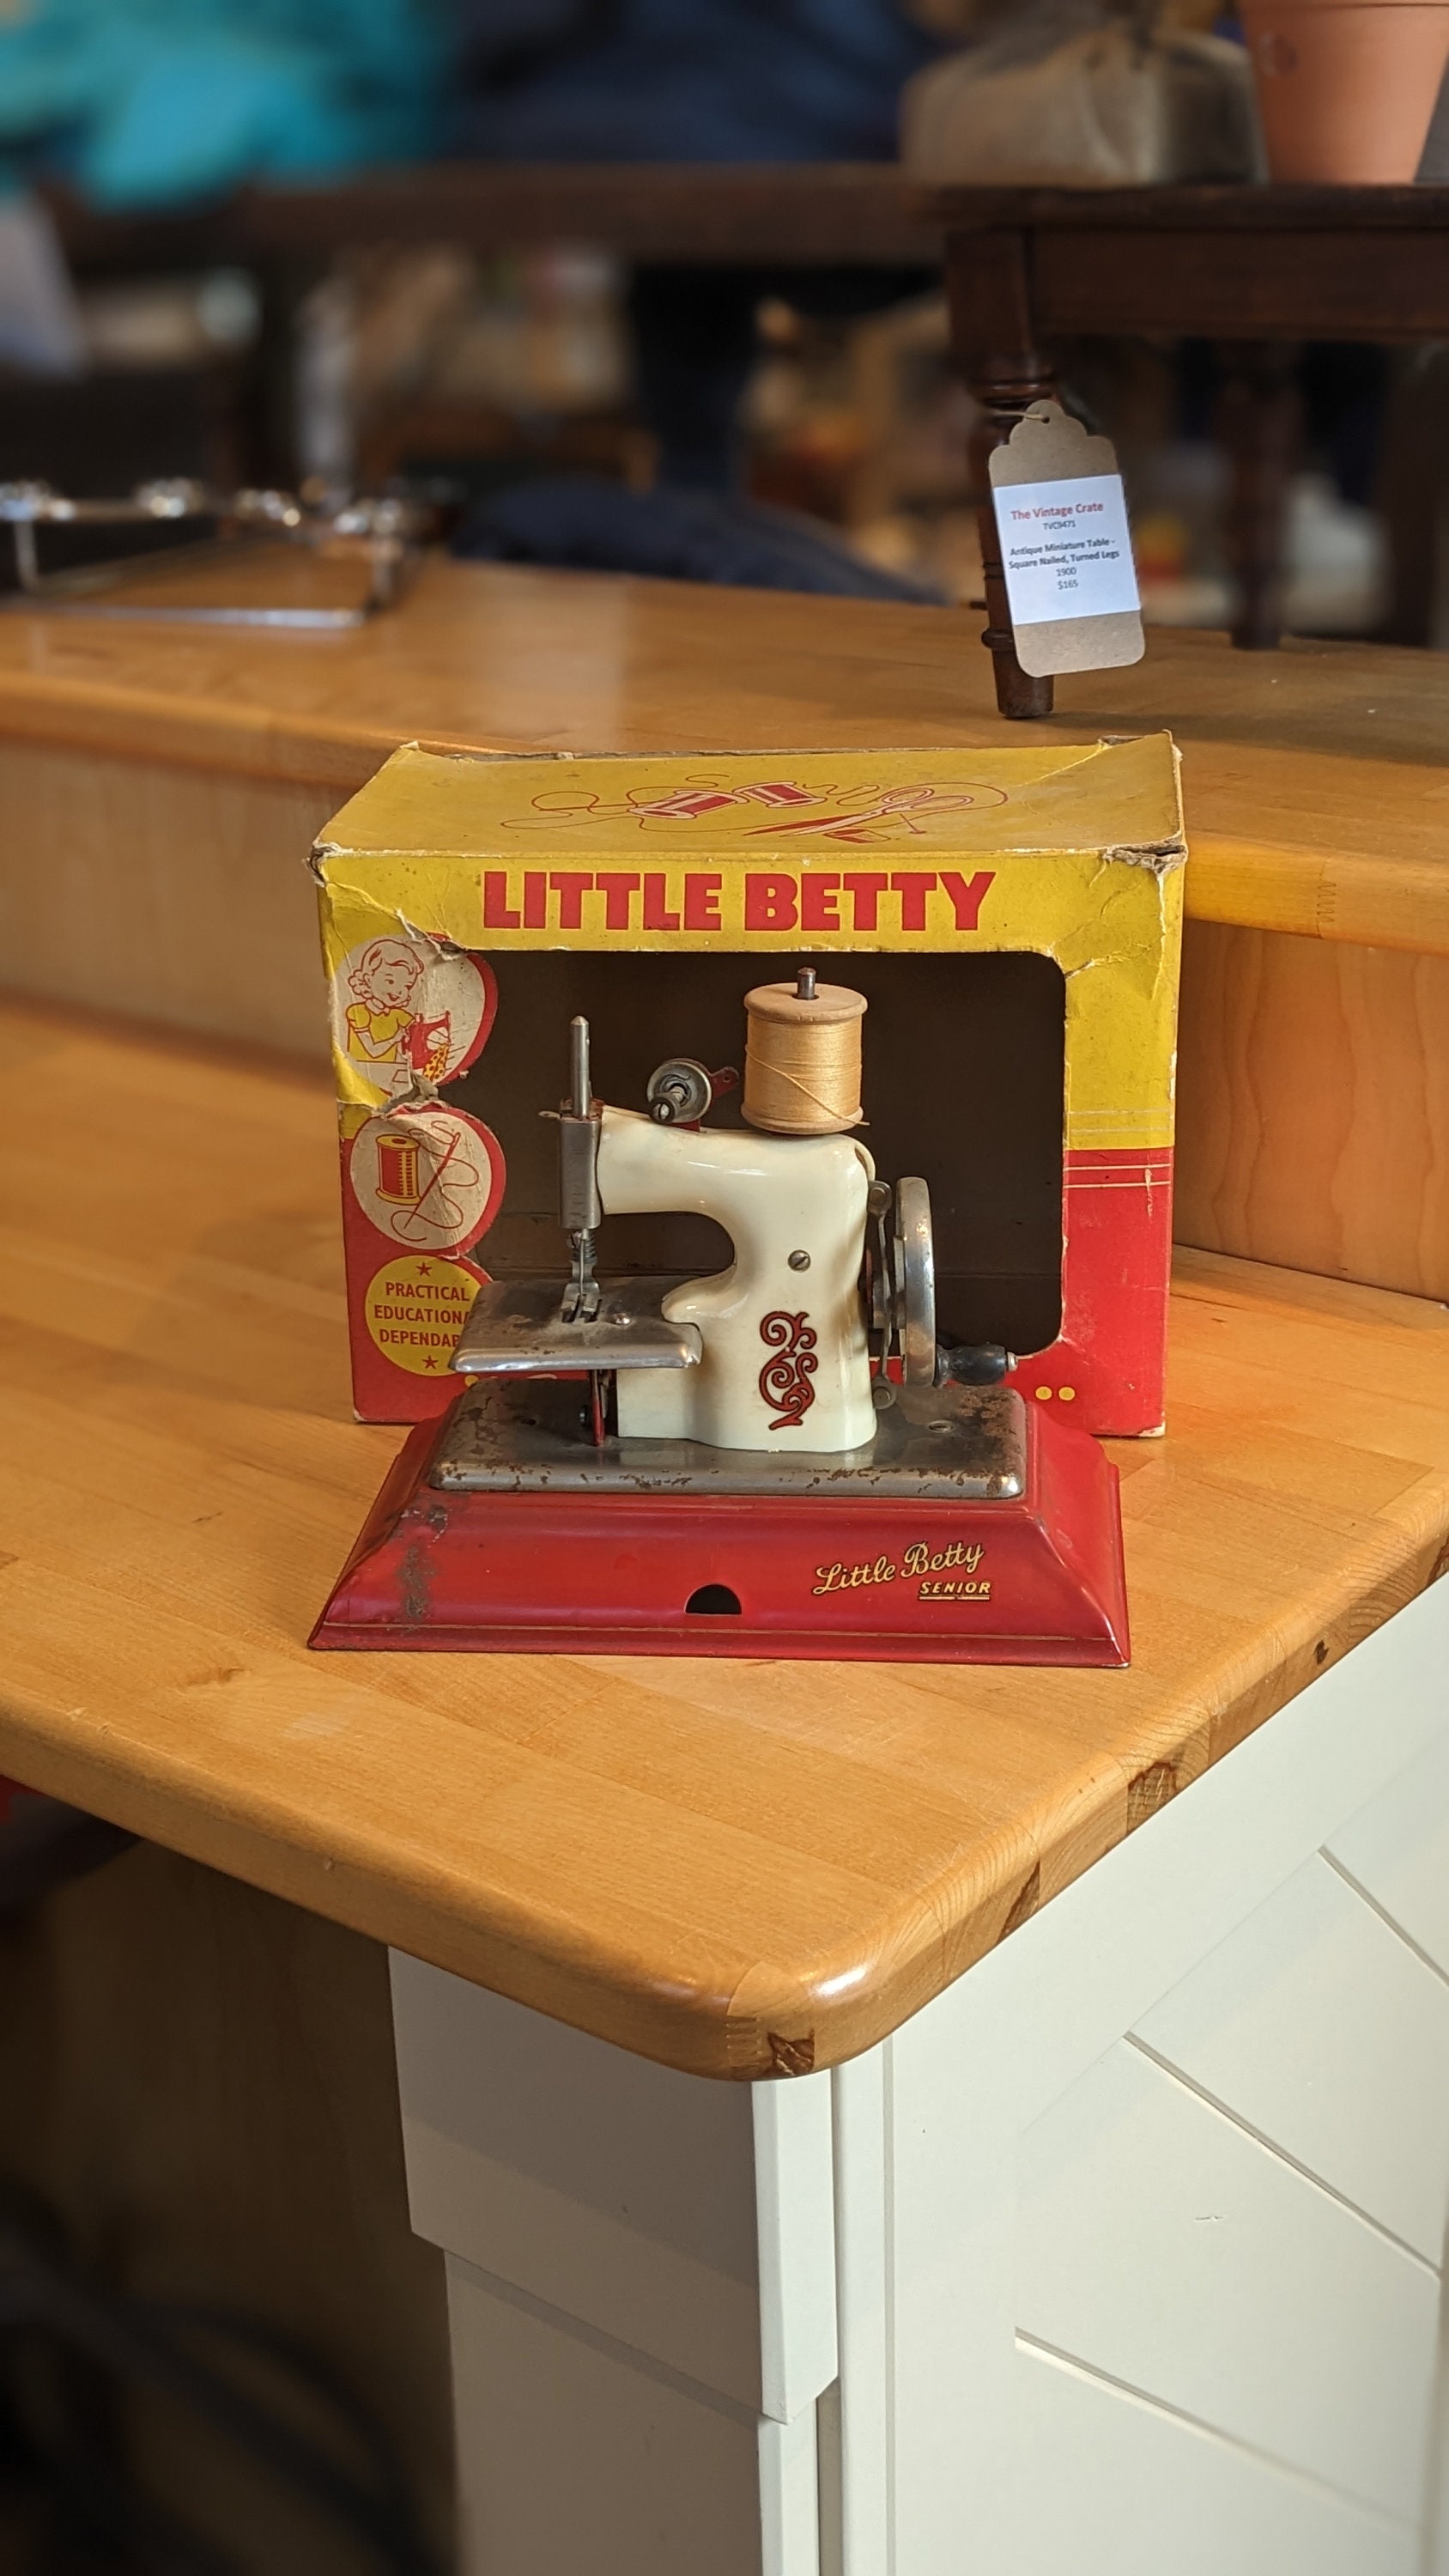 Little Betty Toy Sewing Machine, Vintage Small Sewing Machine in Box, Blue  Metal Little Betty -  Sweden